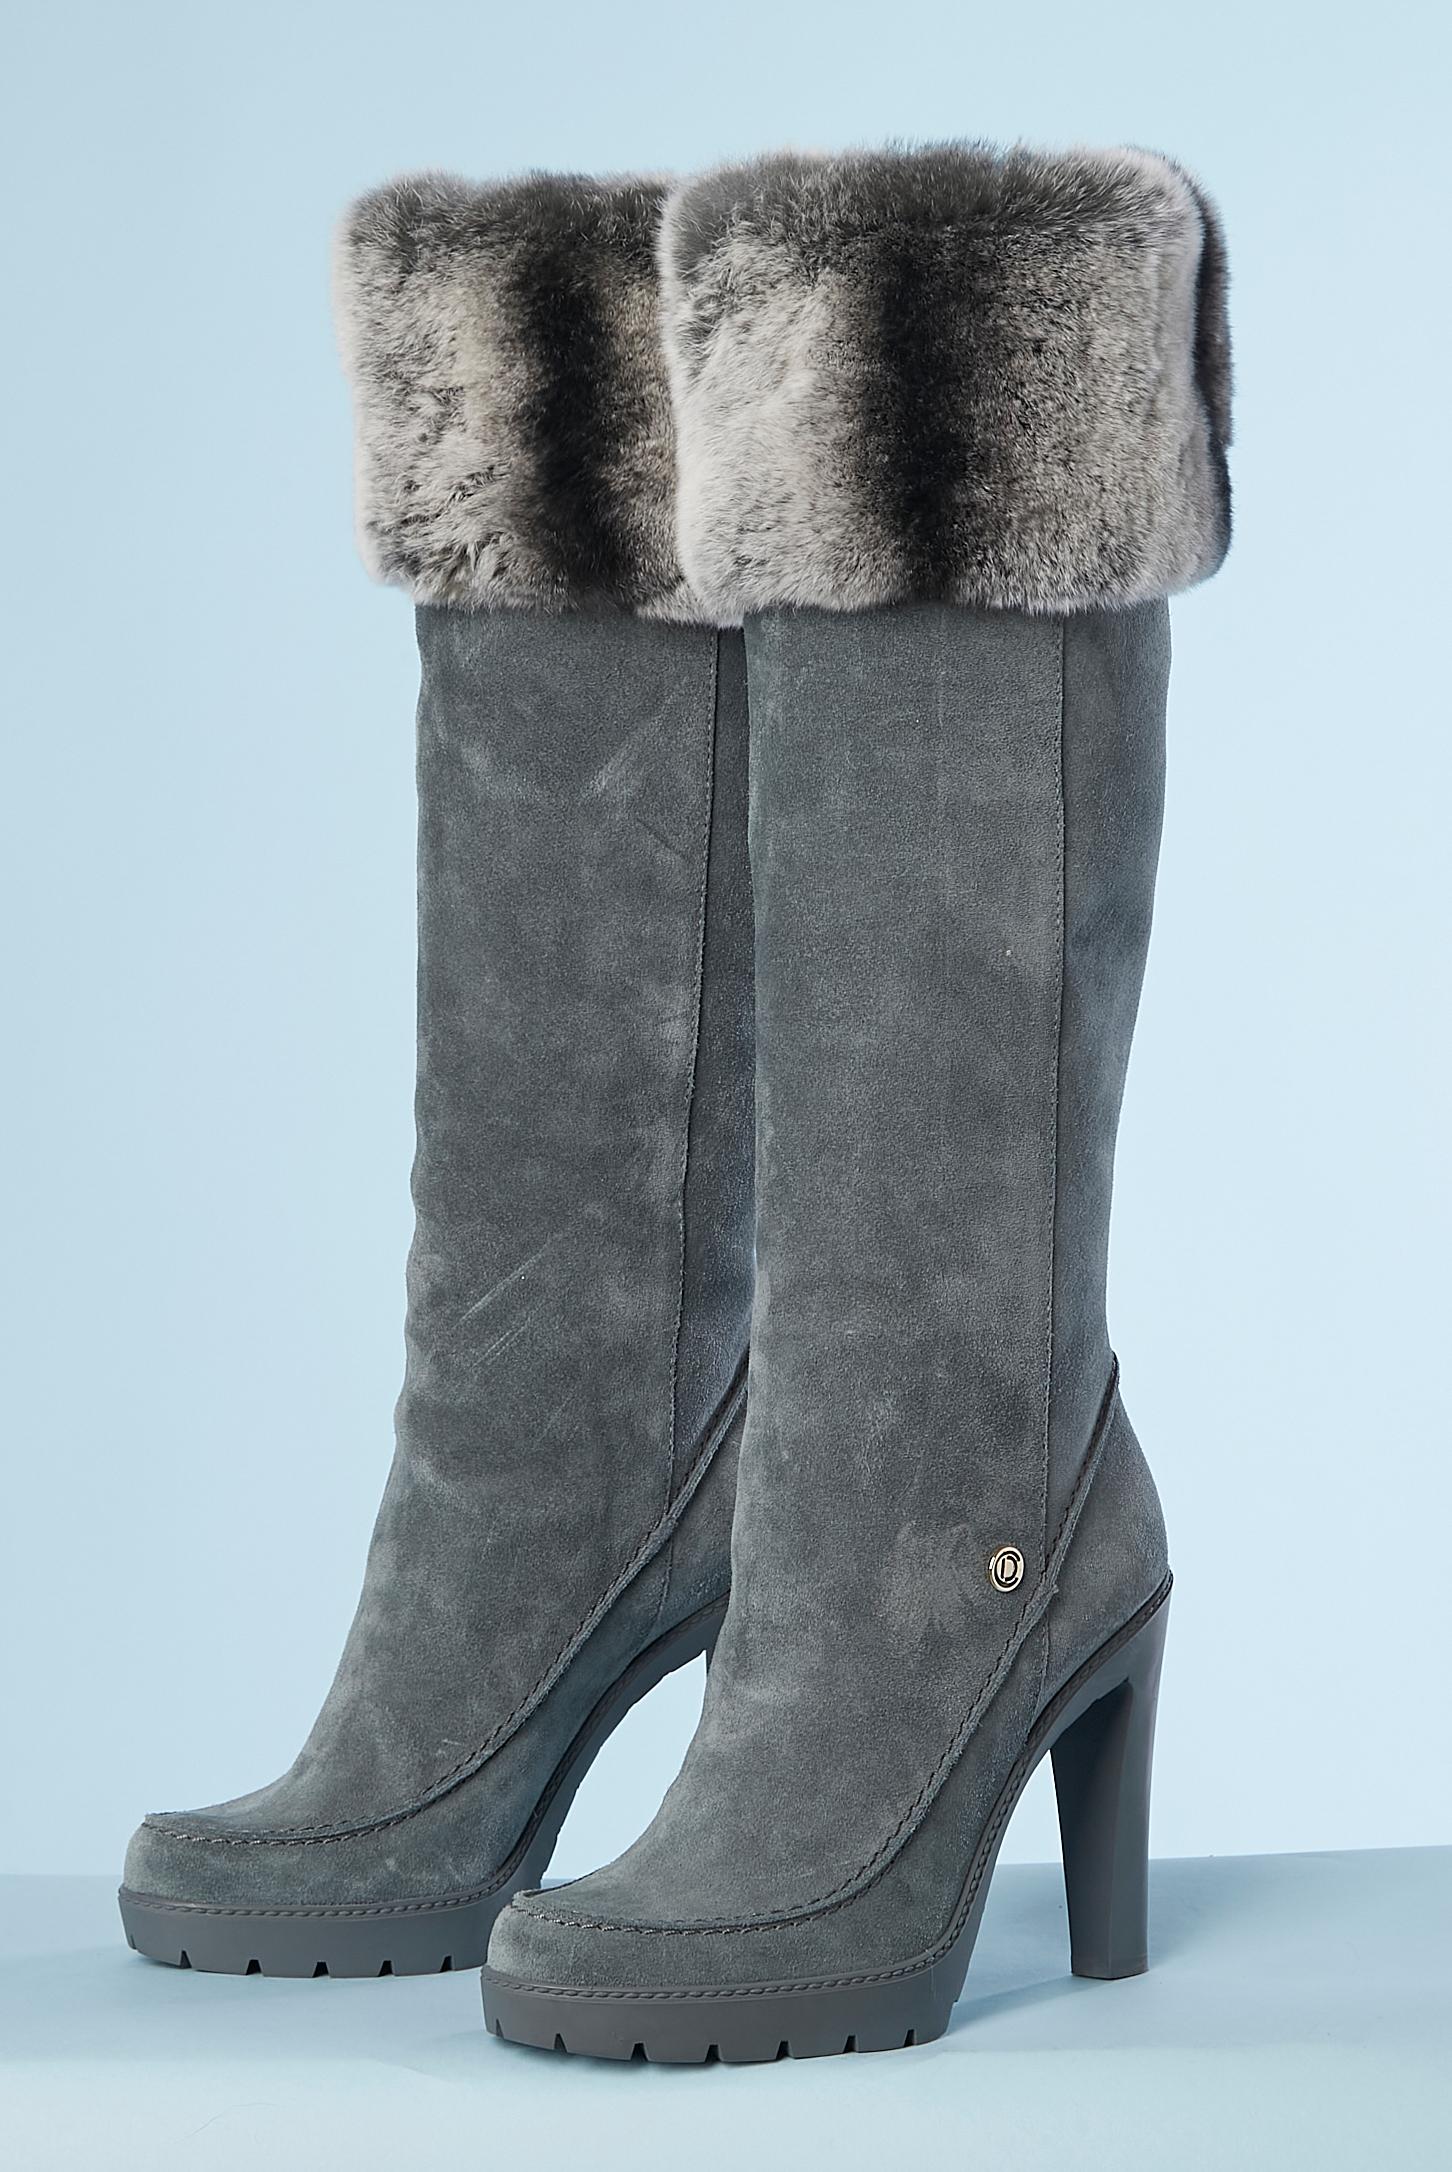 Grey suede boots with furs edge on the top Dior NEW  For Sale 1